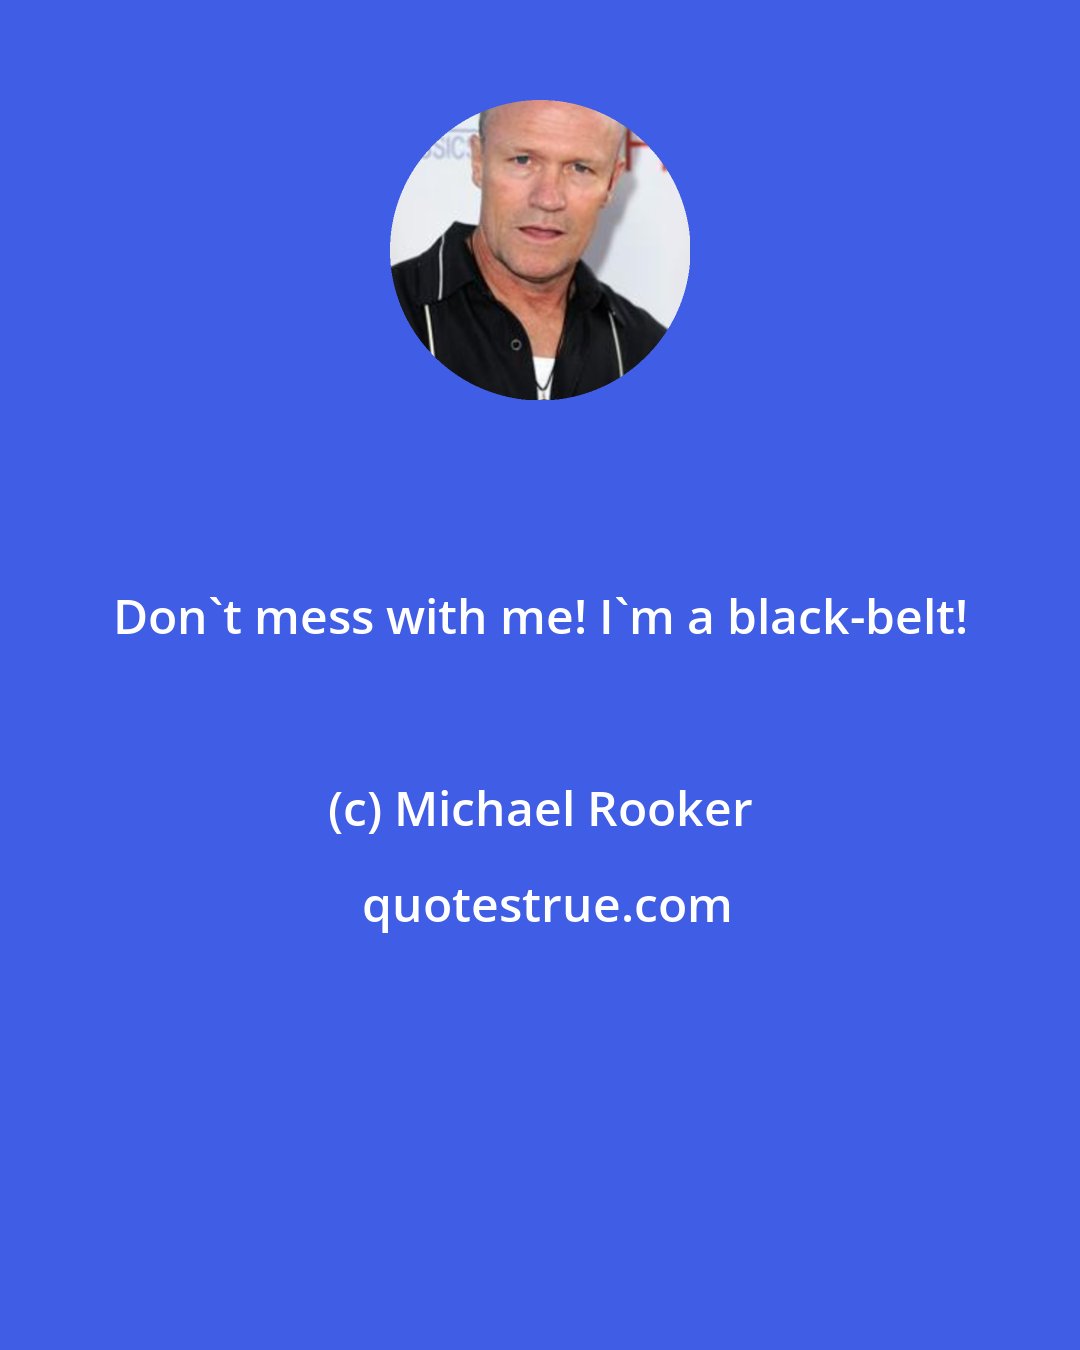 Michael Rooker: Don't mess with me! I'm a black-belt!